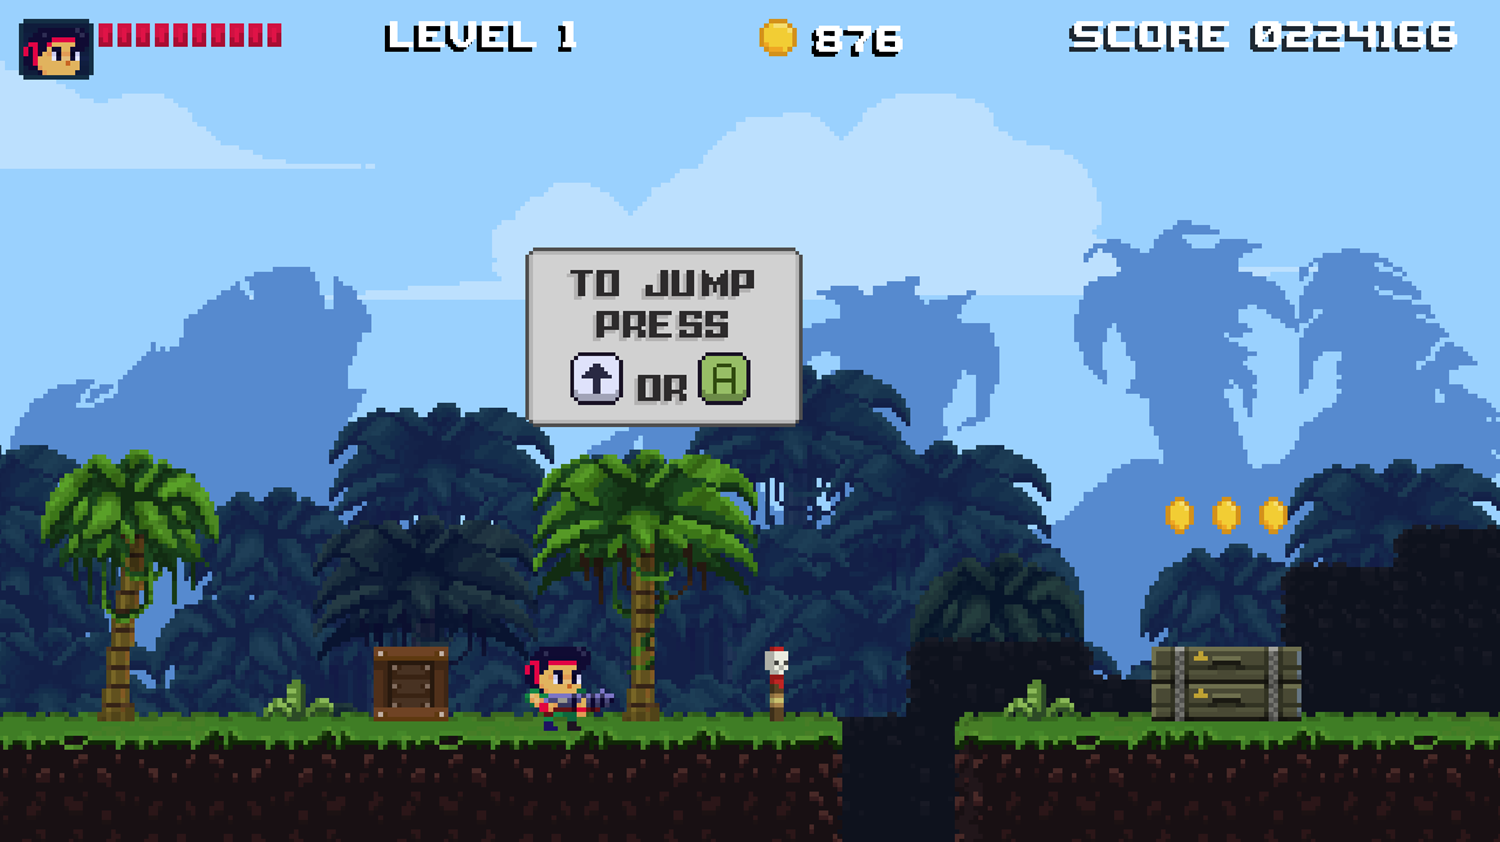 Brave Soldier Invasion of Cyborgs Game Jumping Instructions Screen Screenshot.